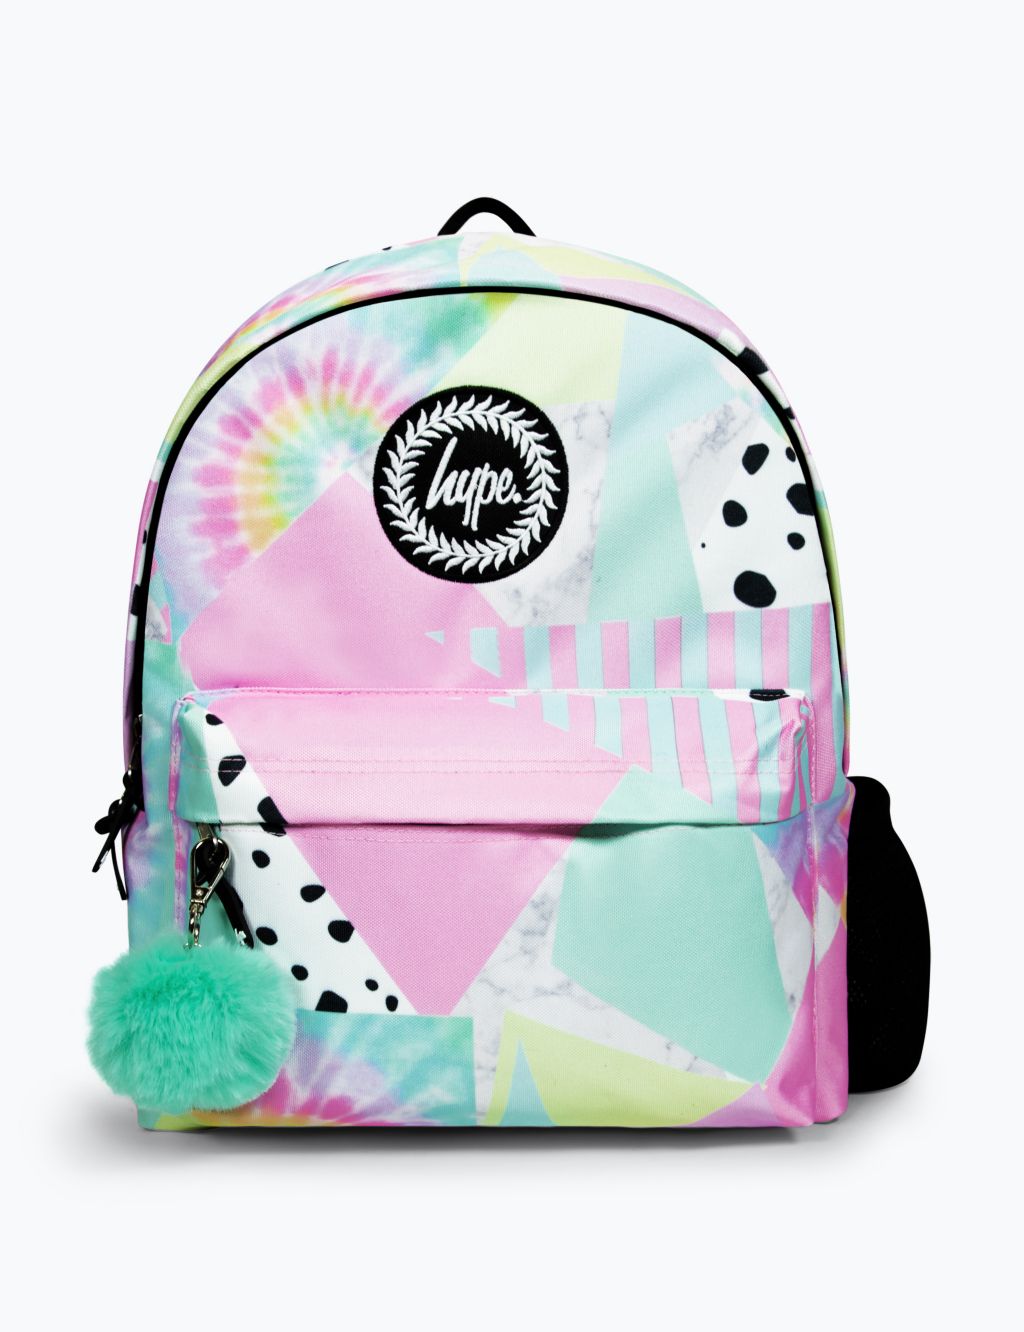 Kids' Collage Backpack